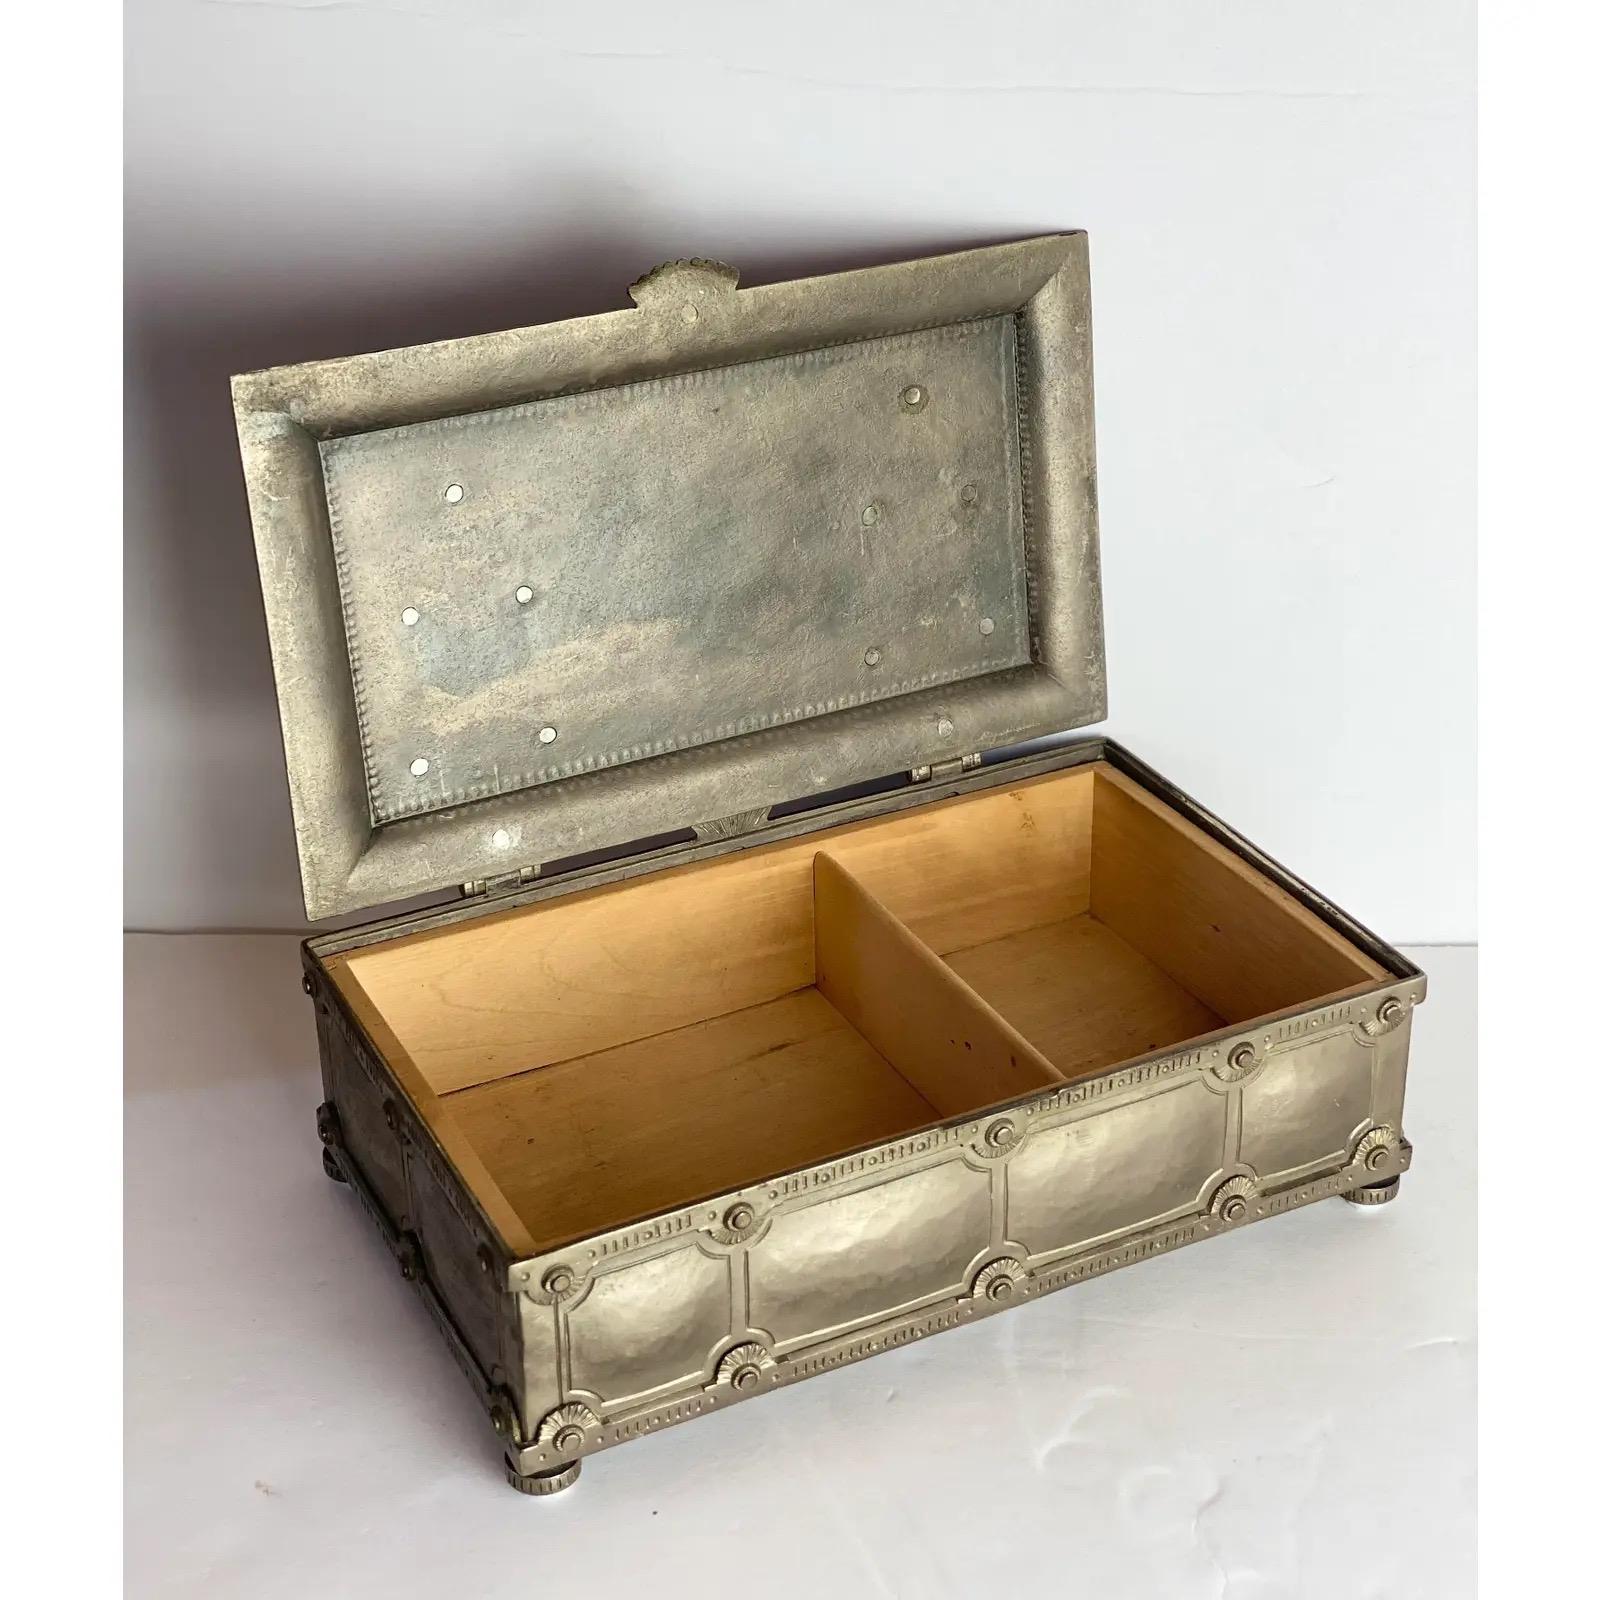 We are very pleased to offer an Old-World silver metal decorative box, circa the 1900s. The soldering process showcases to be extremely labor intensive to achieve the delicate and perfect detailing that surrounds this piece. The hinged top easily